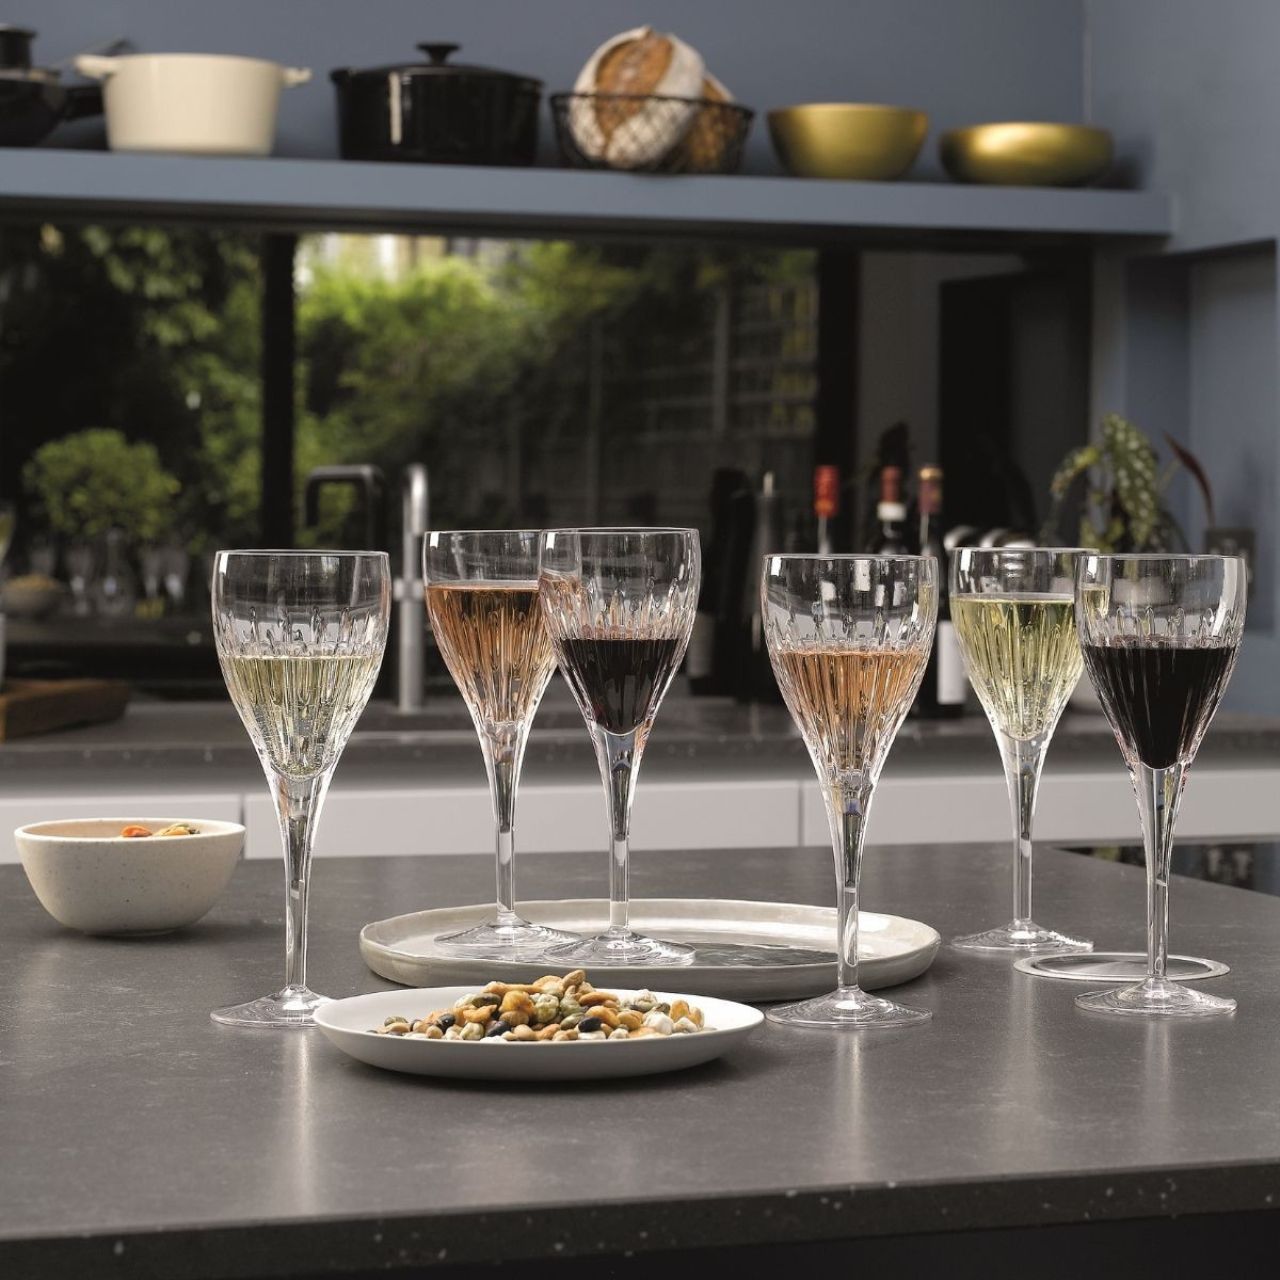 Waterford Crystal Ardan Mara Wine Glass Set of 6  Whether the wine is a select vintage or just a favourite everyday choice, it always feels special when served in a Waterford glass. The set of six Mara wine glasses provide the perfect modern design, created by Waterford to reflect the brilliance and sparkle it is renowned for but with a contemporary shape and simple, versatile pattern.